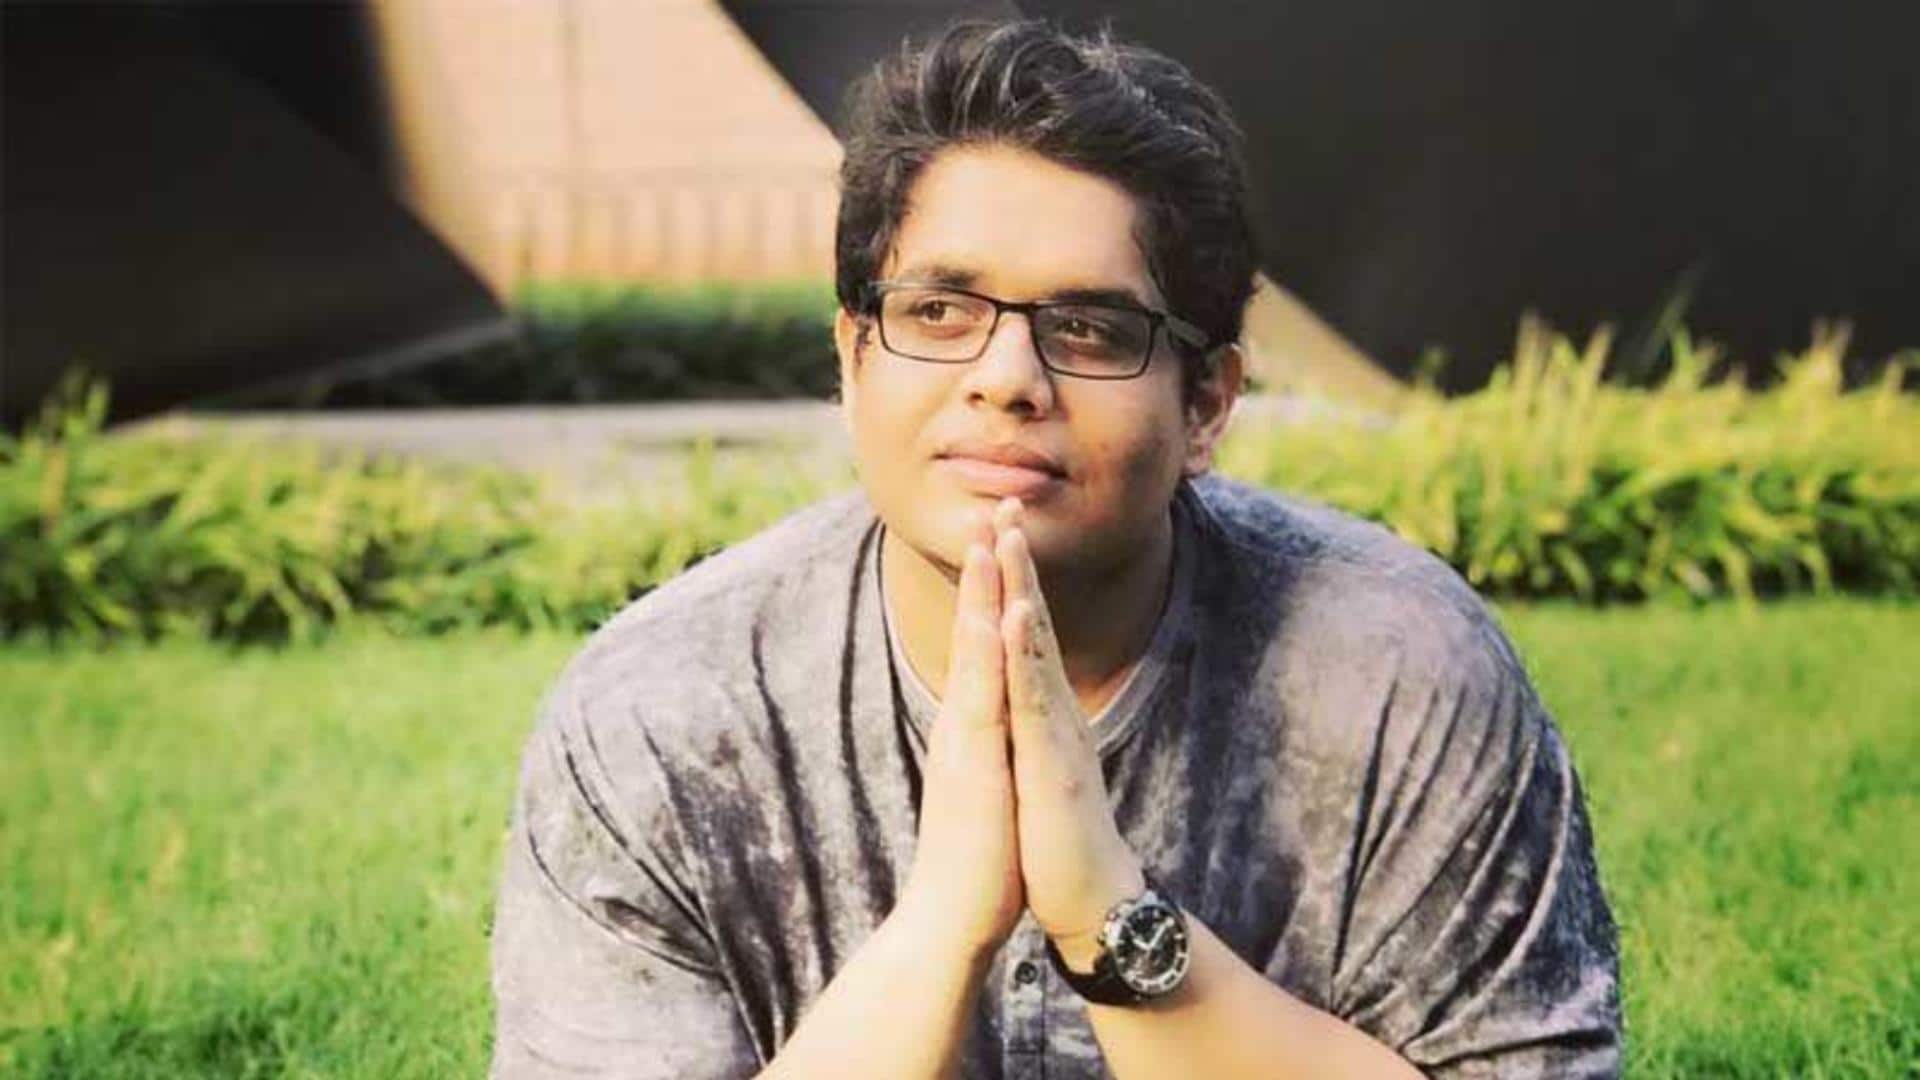 Tanmay Bhat's Kotak Mahindra ad campaign draws flak: Know everything